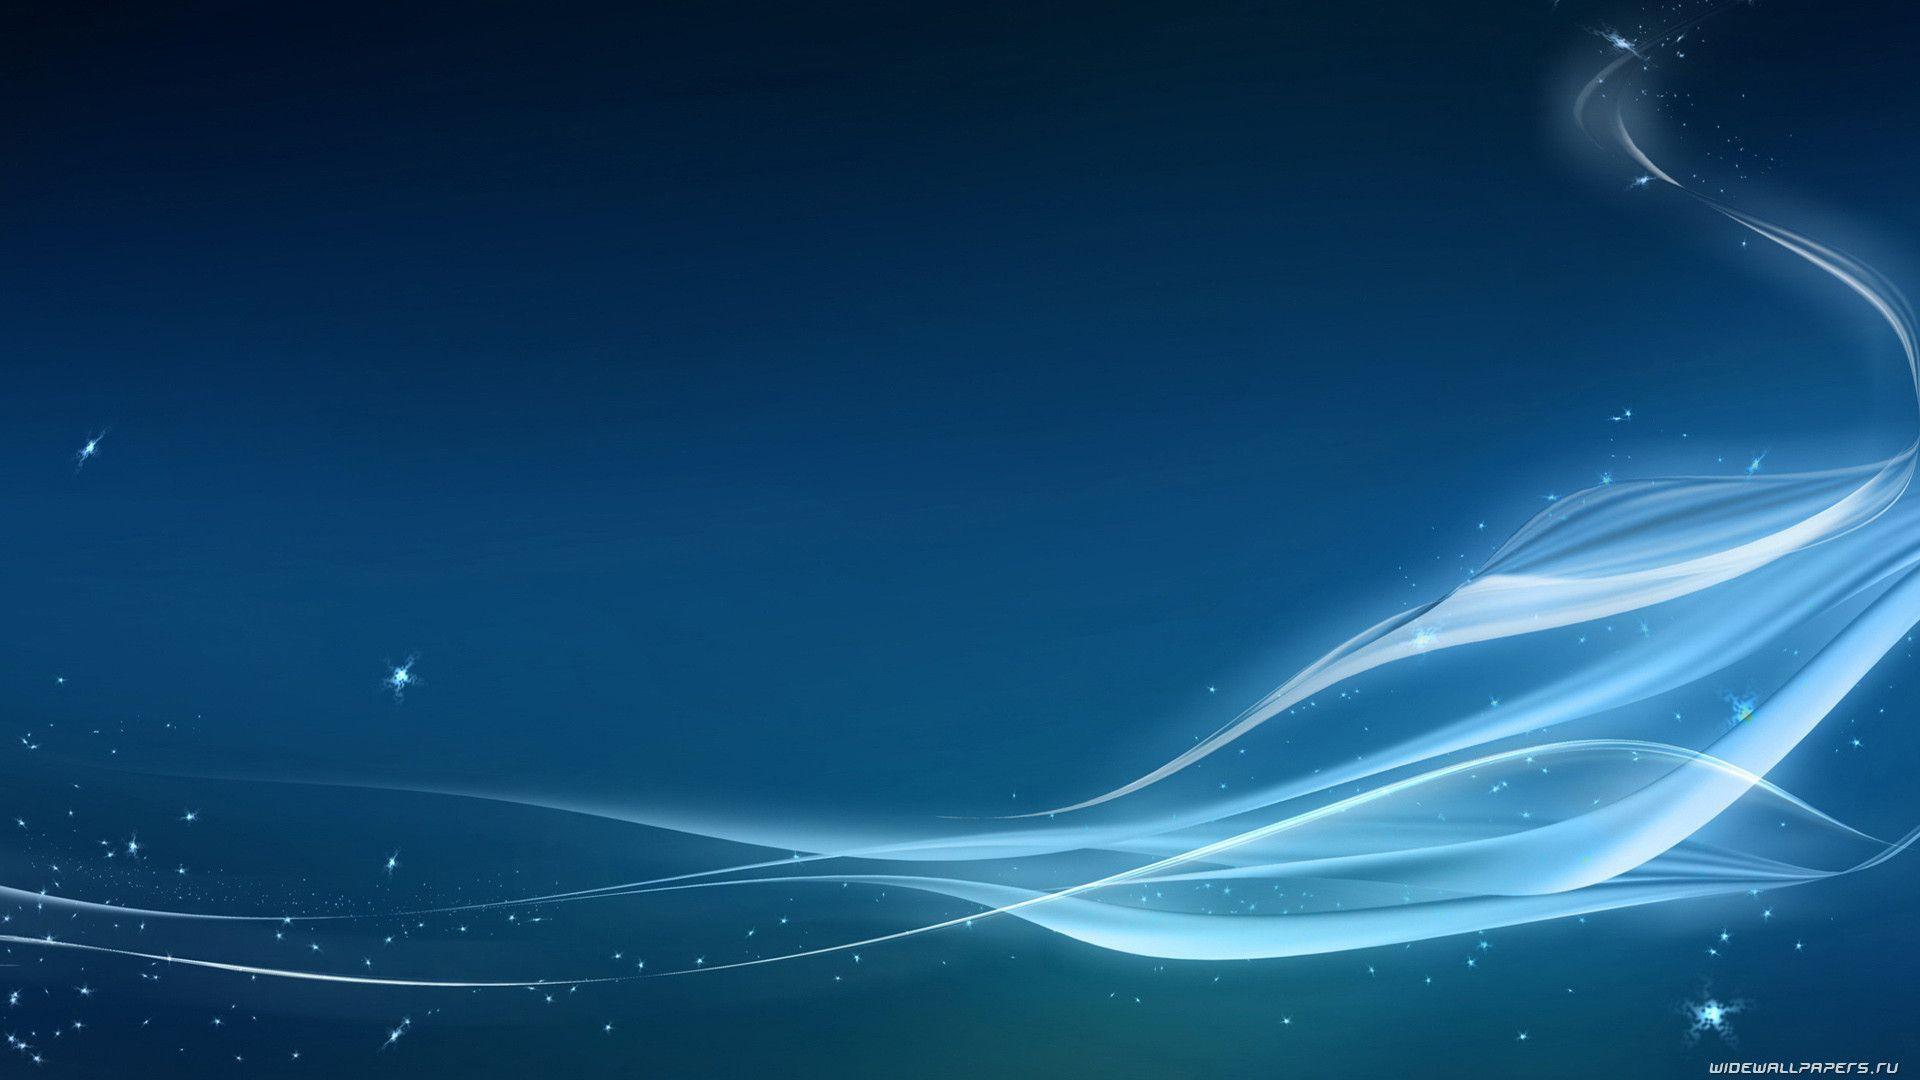 Blue Abstract Background Wallpaper Download 6227 Full HD Wallpaper